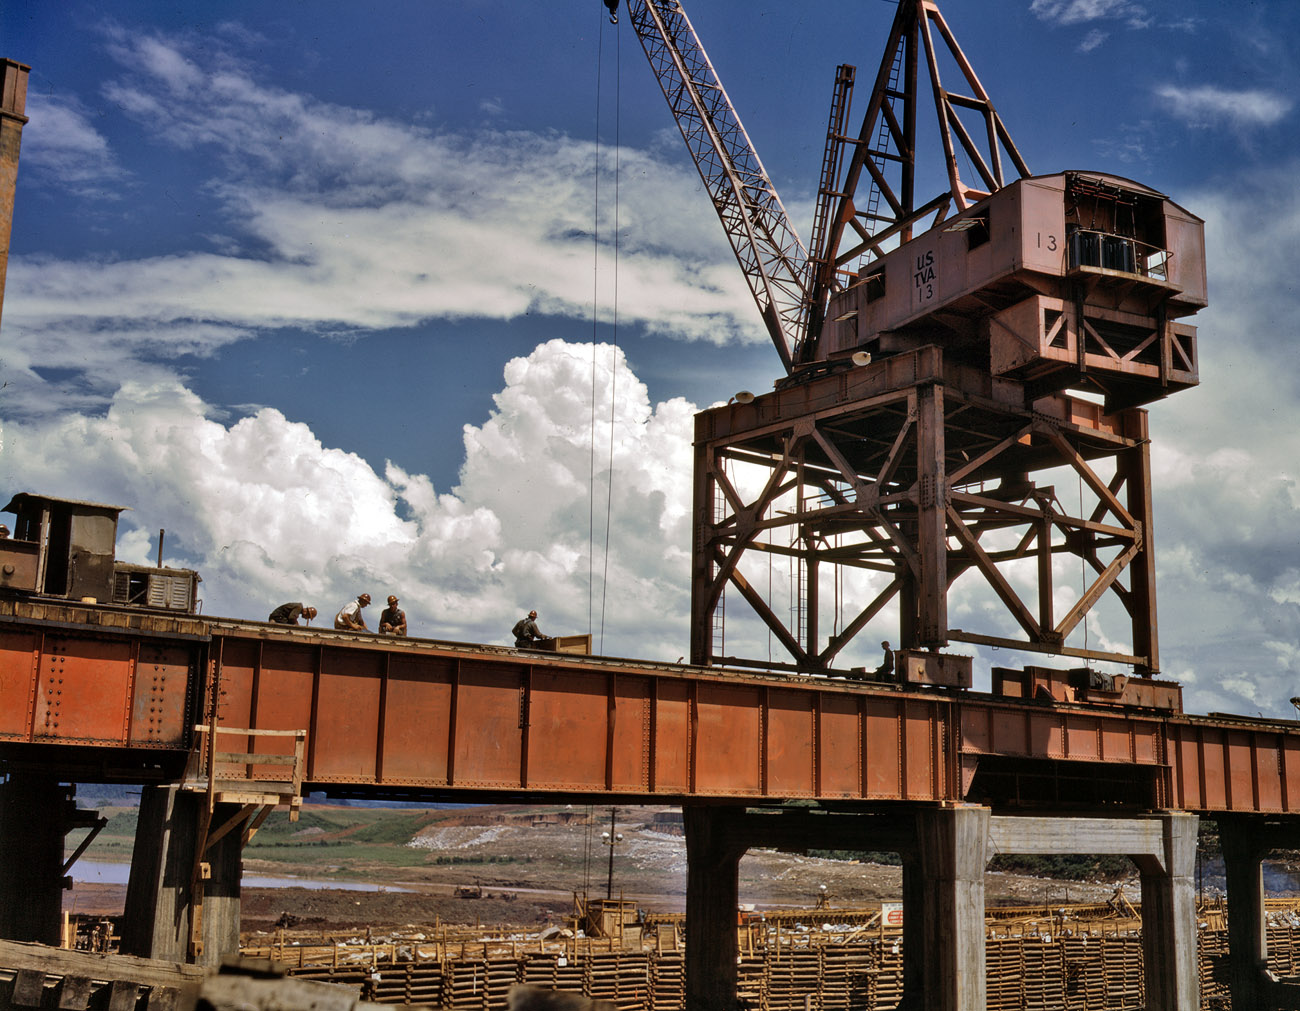 June 1942. Crane at the Tennessee Valley Authority's Douglas Dam. View full size. 4x5 Kodachrome transparency by Alfred Palmer. An amazing photograph.